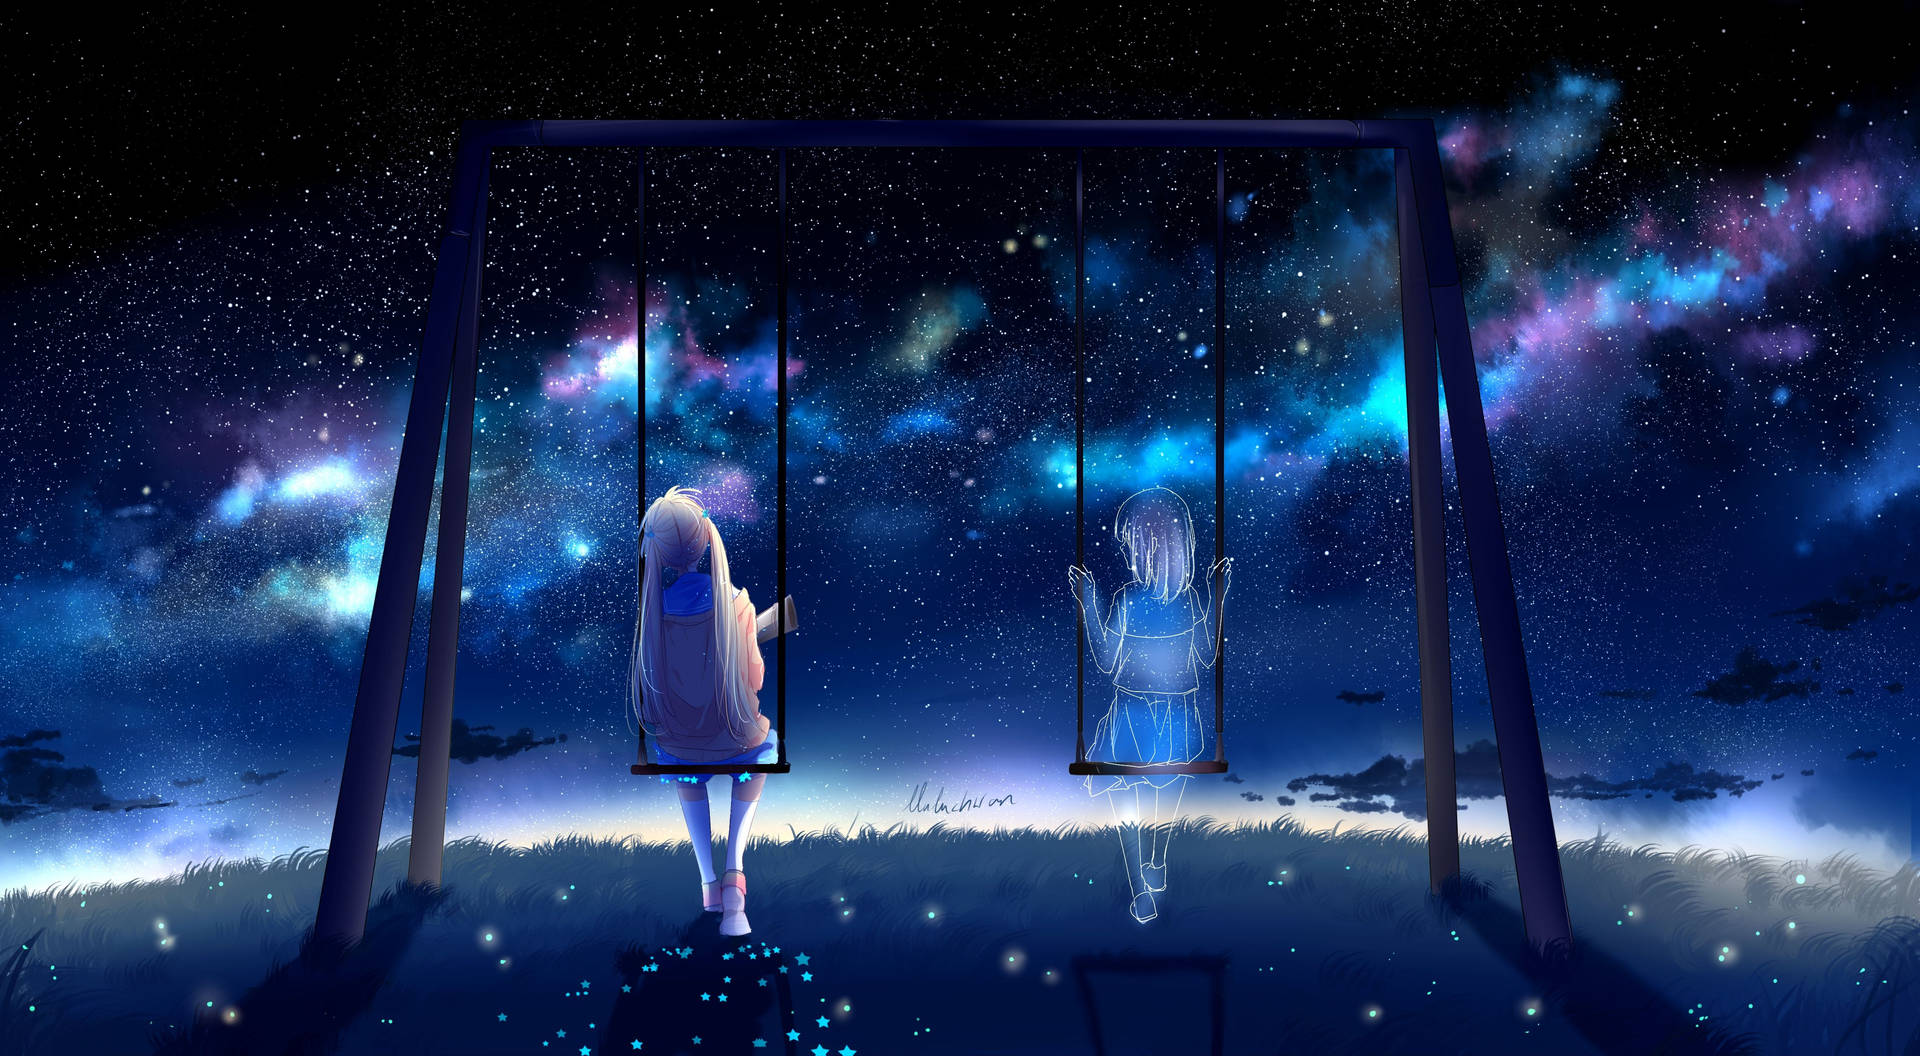 Anime Girl Sad Alone In Swing With Ghost